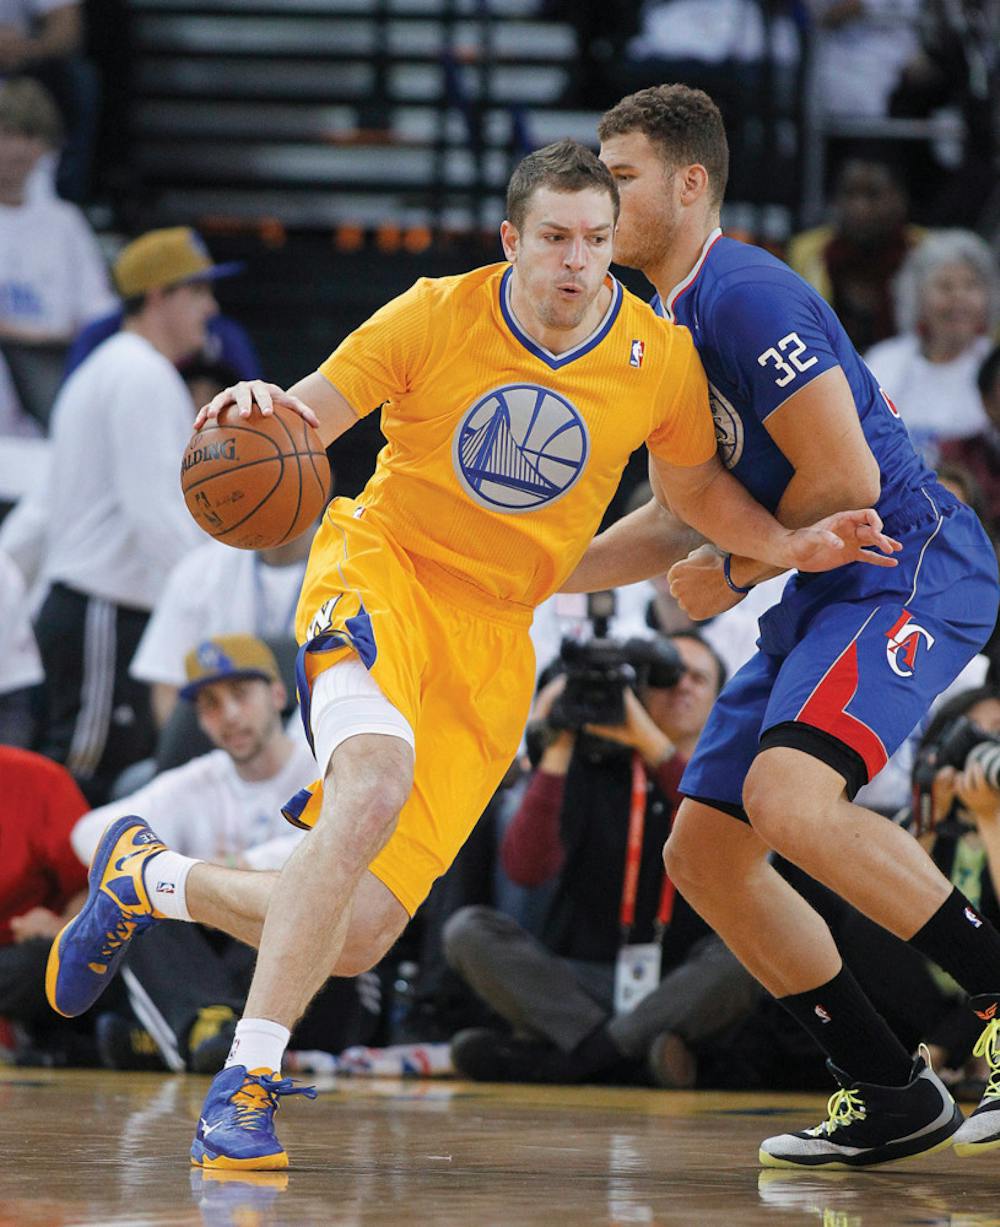 <p>Golden State Warriors forward and former Gator David Lee won his first NBA title Tuesday night as the Warriors defeated the Cleveland Cavaliers 105-97 in Game 6 of the NBA Finals. With the title for Lee and fellow former Gator and Warrior teammate Marreese Speights, a Gator has now been a part of the championship-winning team for five consecutive years.</p>